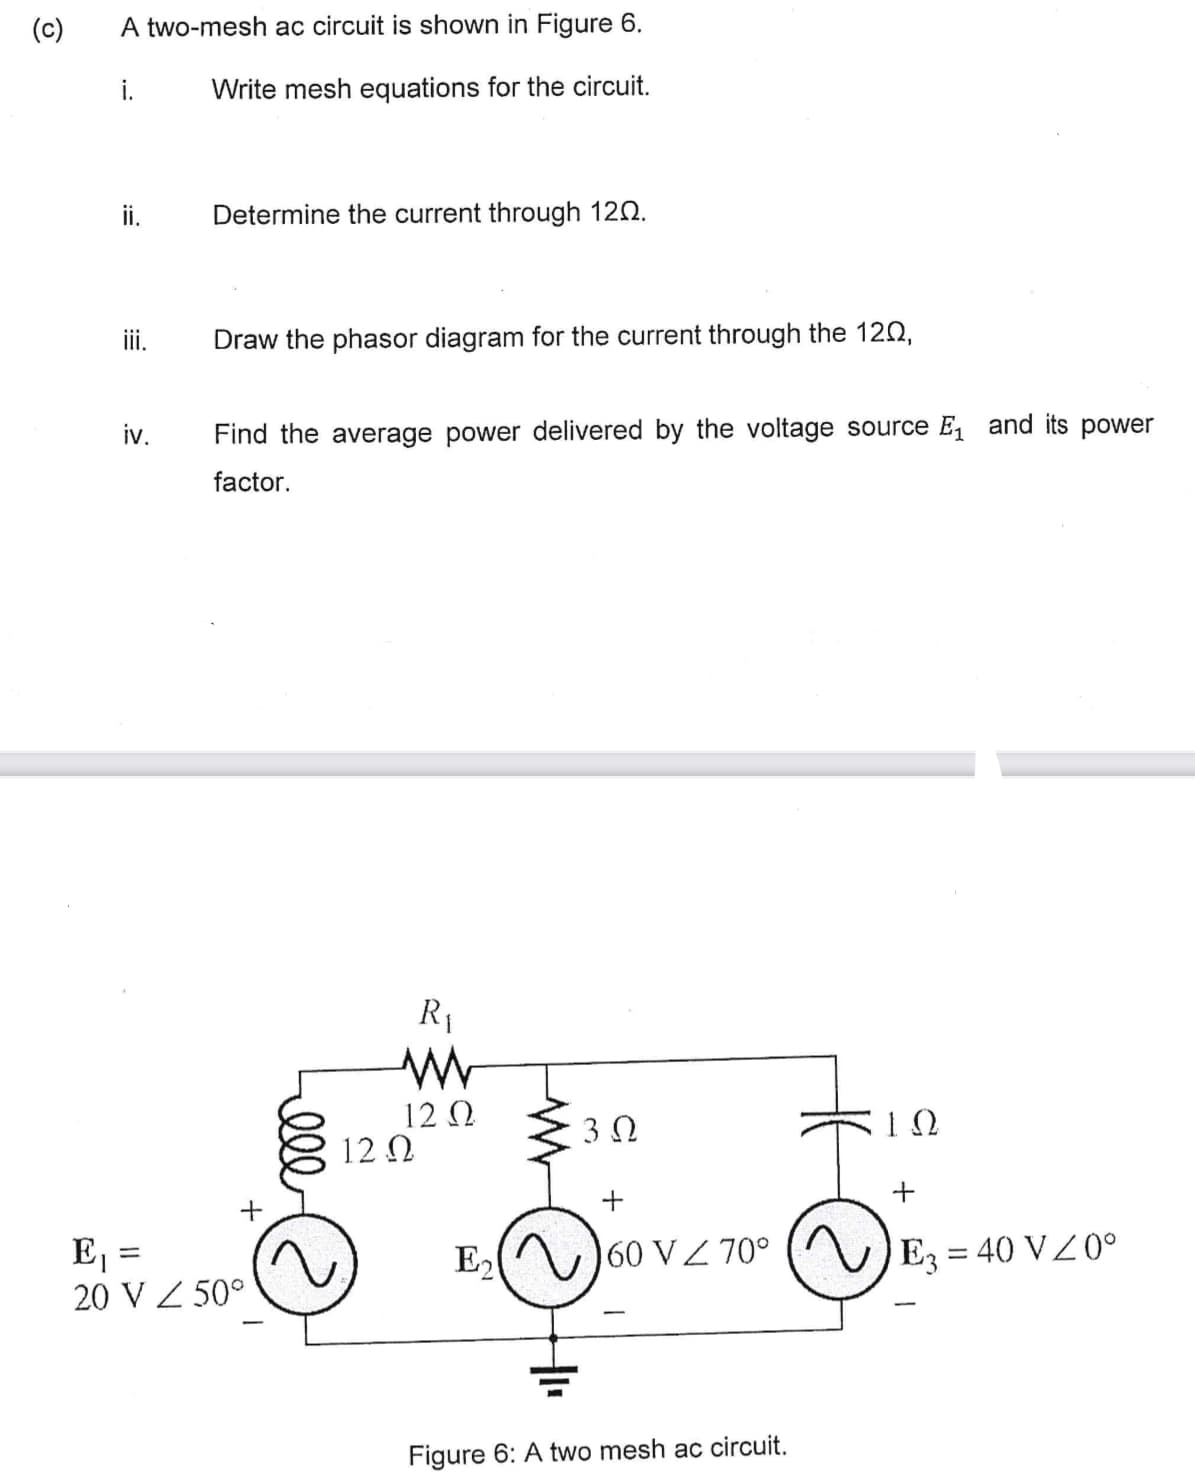 (c)
A two-mesh ac circuit is shown in Figure 6.
i.
Write mesh equations for the circuit.
ii.
iii.
iv.
Determine the current through 120.
=
Draw the phasor diagram for the current through the 120,
Find the average power delivered by the voltage source E₁ and its power
factor.
+
E₁
20 V Z 50°
ell
R₁
12 Ω
12 Ω
E₂
3.Q
60 VZ 70°
Figure 6: A two mesh ac circuit.
ΤΩ
E3 = 40 V / 0°